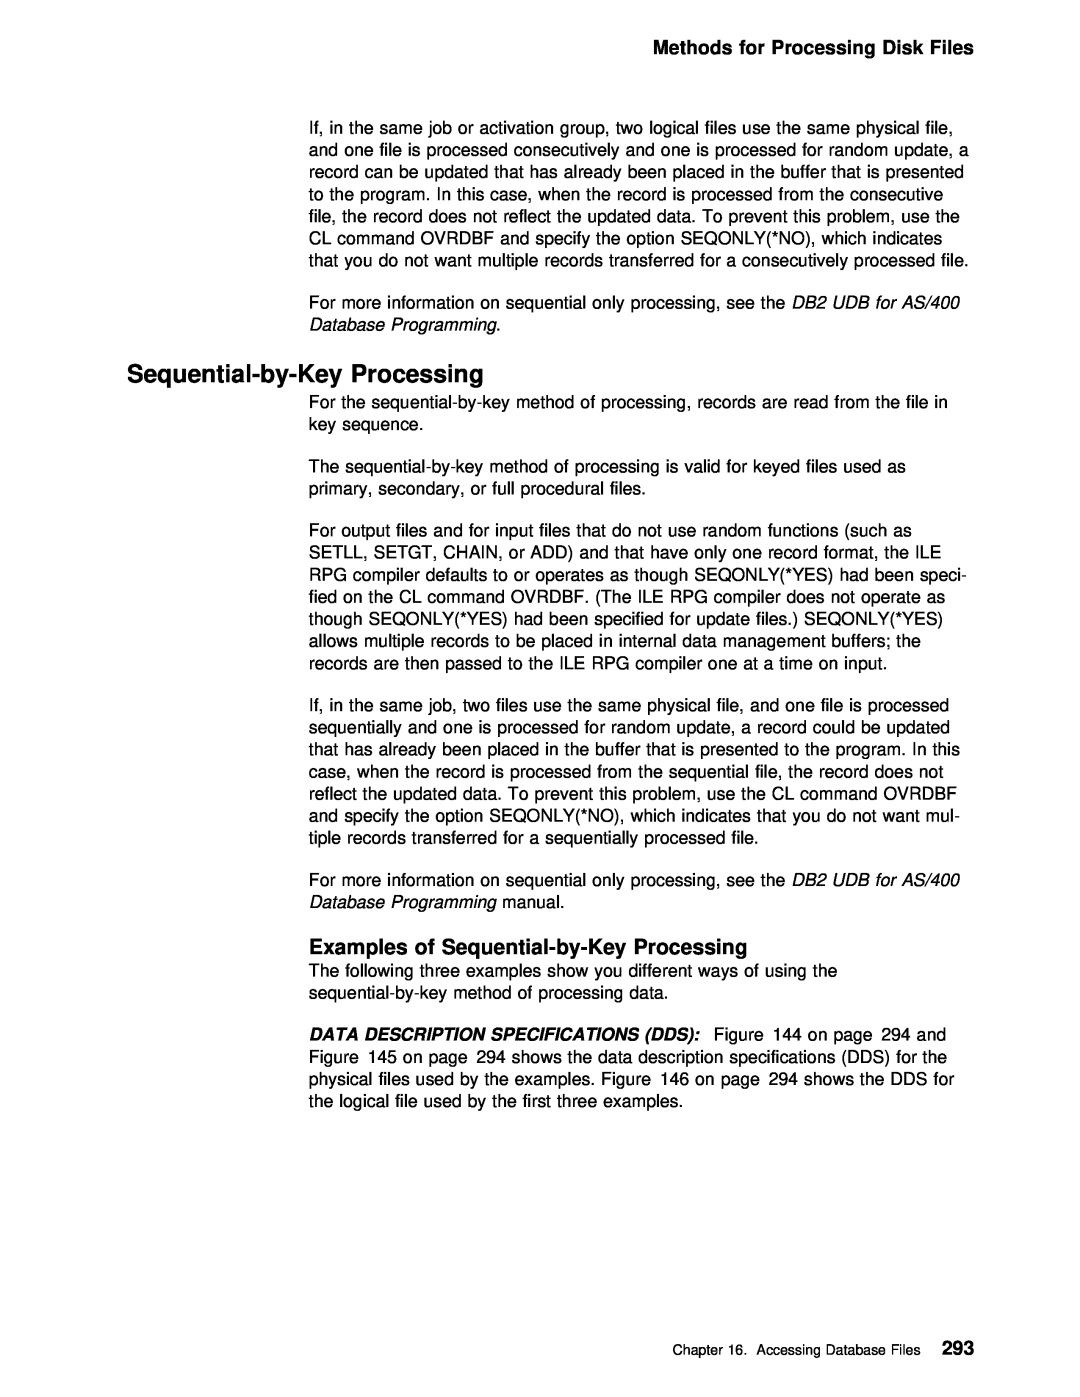 IBM AS/400 Examples of Sequential-by-Key Processing, DATA DESCRIPTION SPECIFICATIONS DDSFigure 144 on page 294 and 